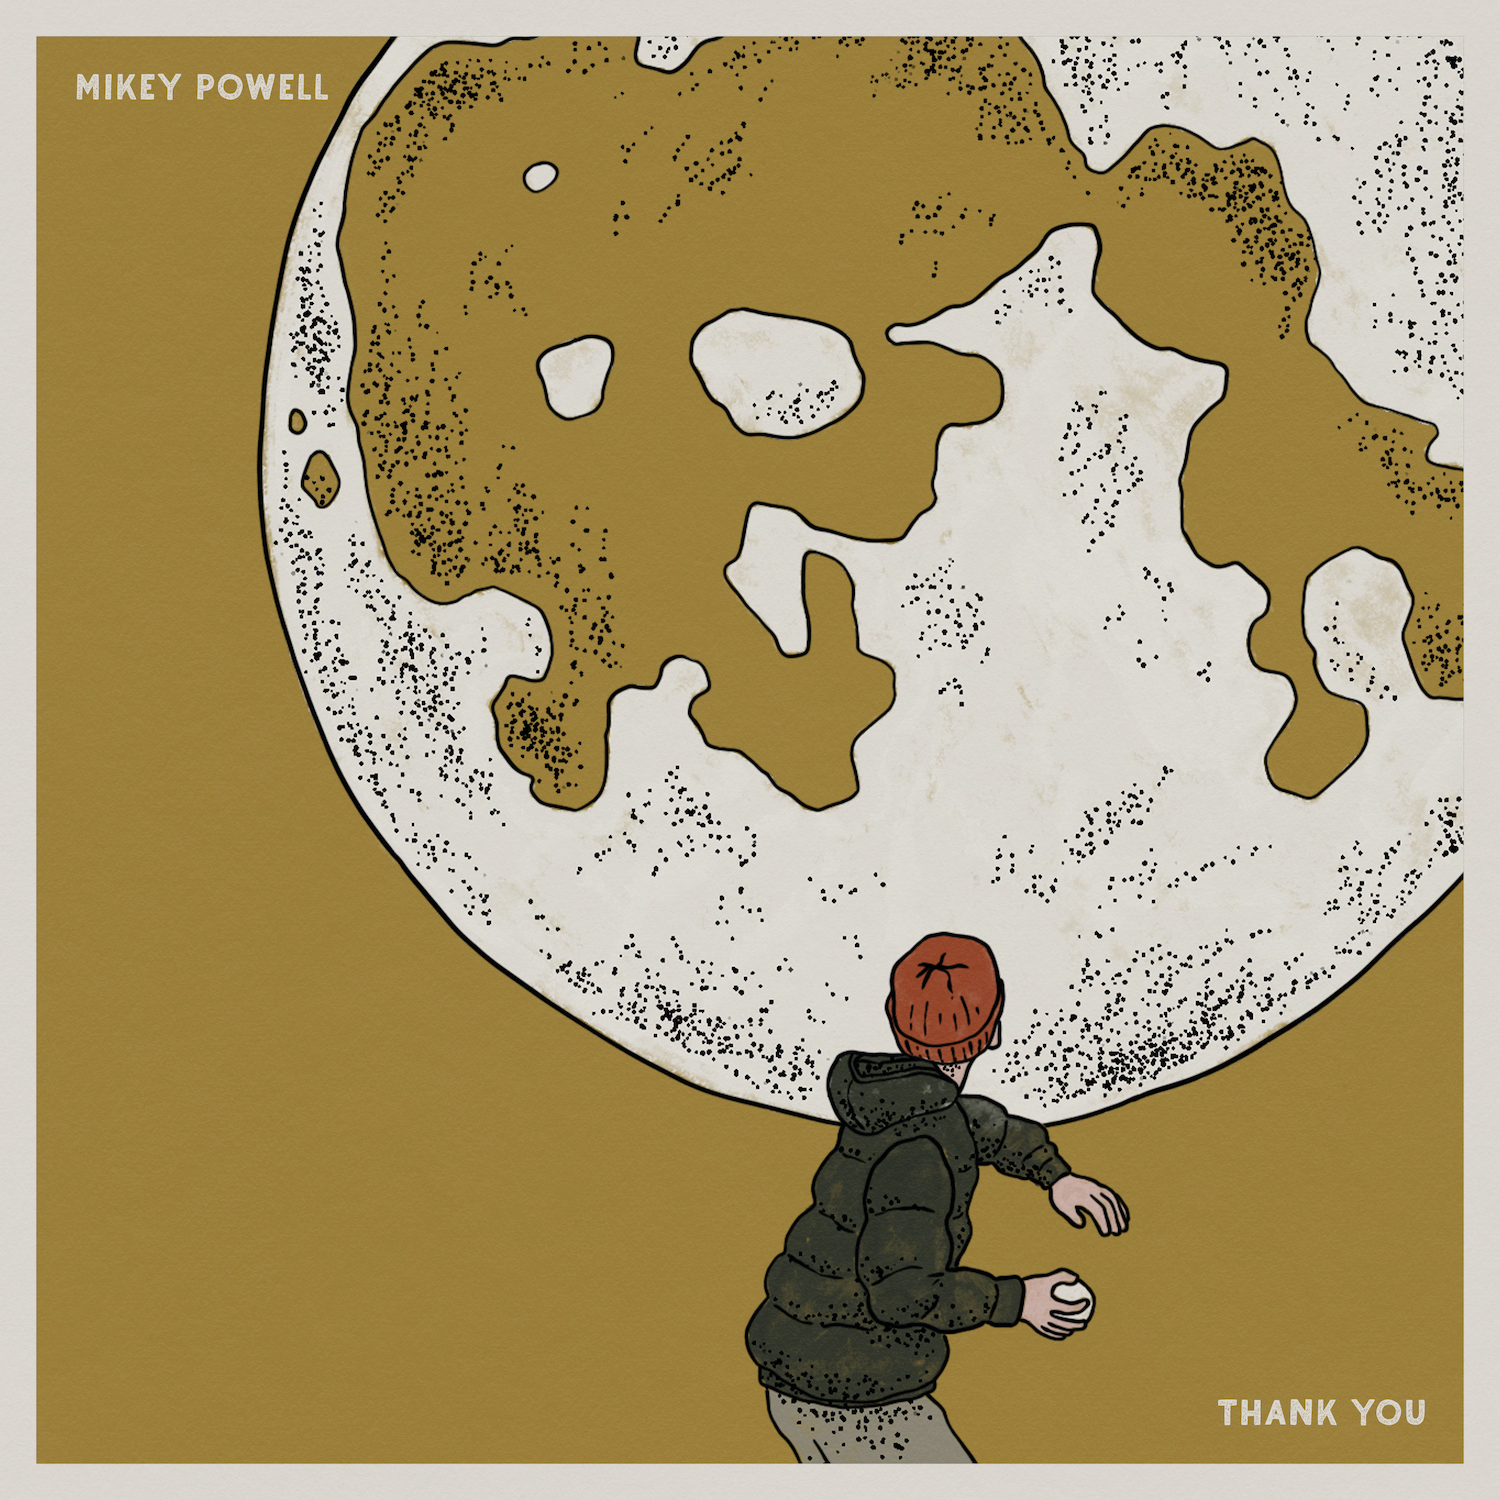 Mikey Powell - The Snowball Chronicles Vol 1 - Singles cover - V2 - Thank you